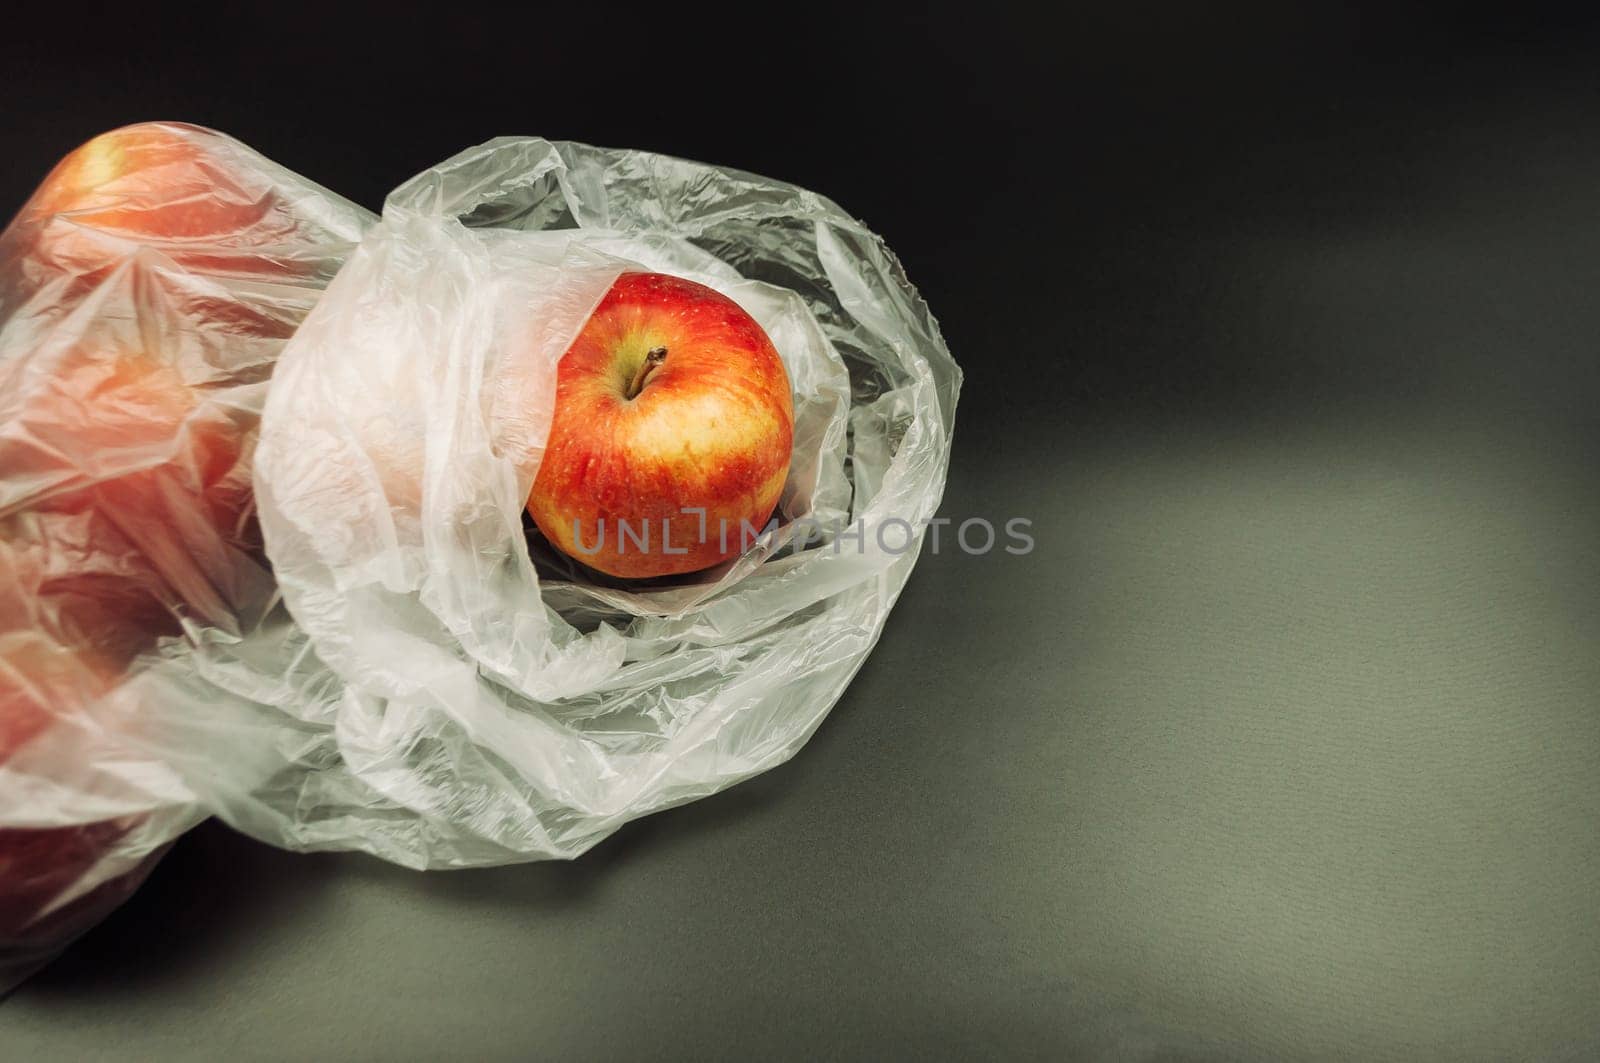 Fresh apples, encased in non-recyclable plastic, highlight the environmental challenges posed by excessive plastic usage, underscoring the need for sustainable alternatives.